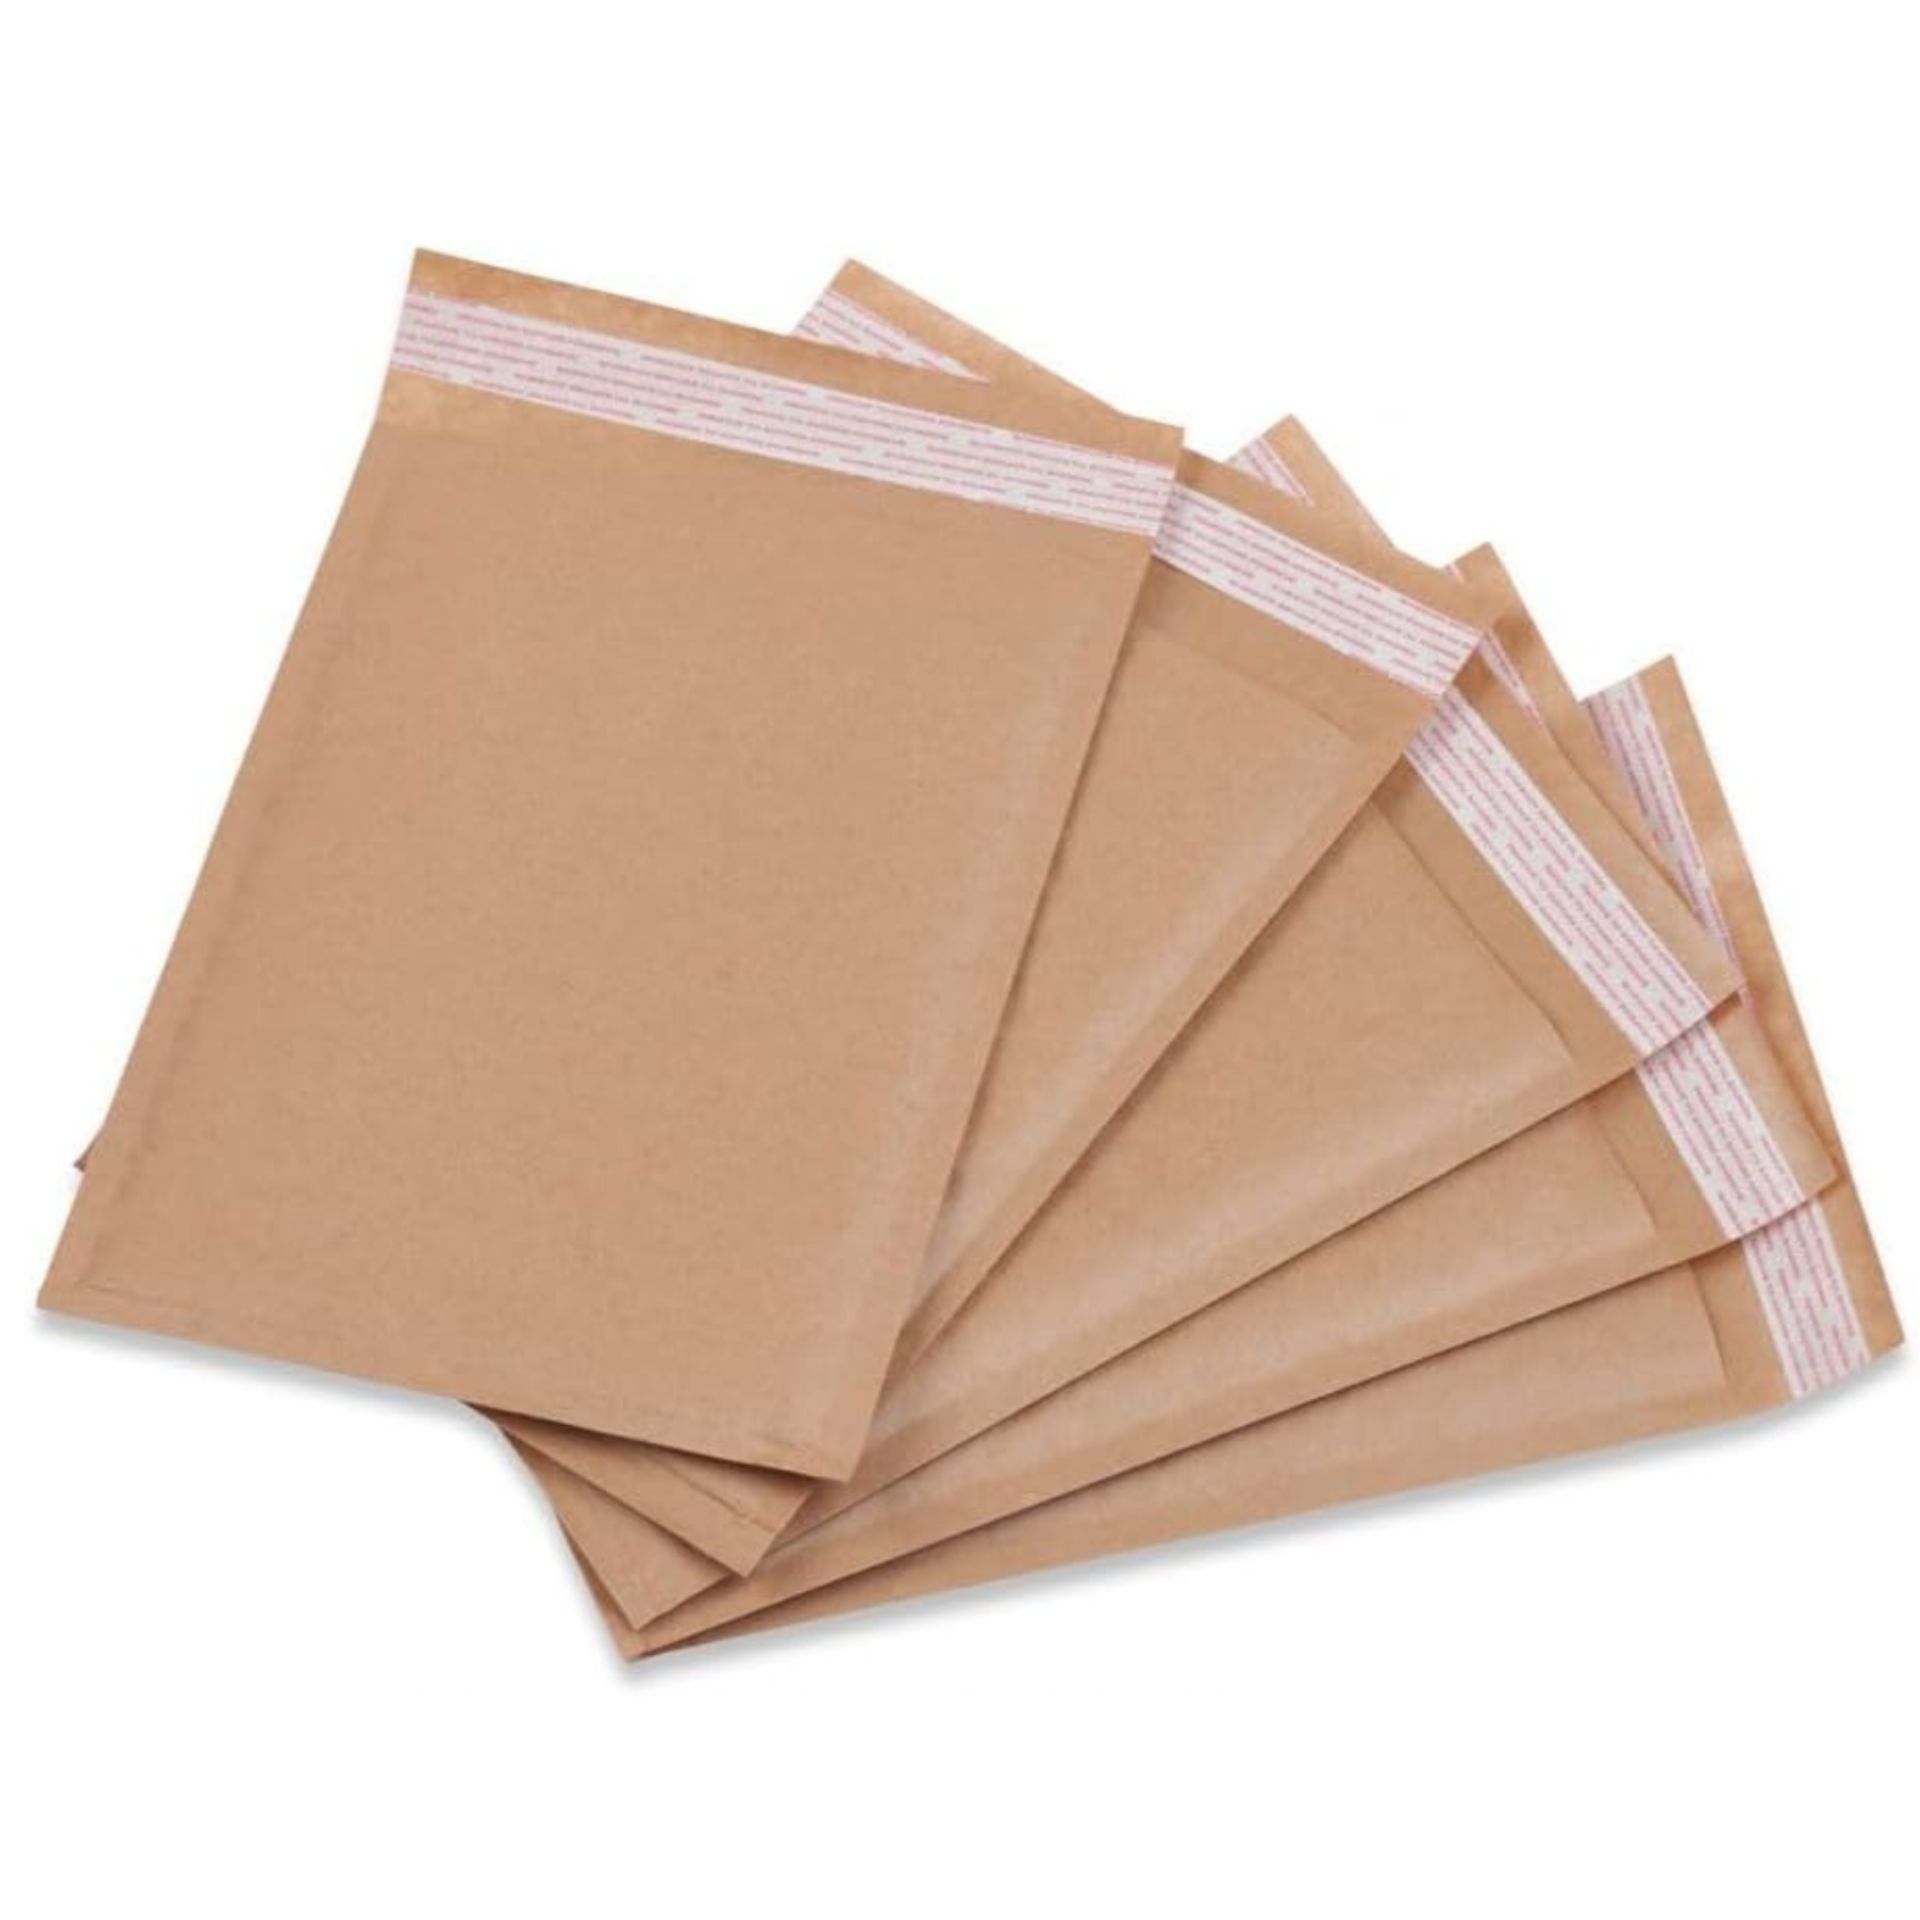 10 BOXES OF PAPER BAG ENVELOPES BUBBLE BAGS 100 PACK PEEL AND SEAL TOUGH LIGHT PADDED (200 X 260MM)